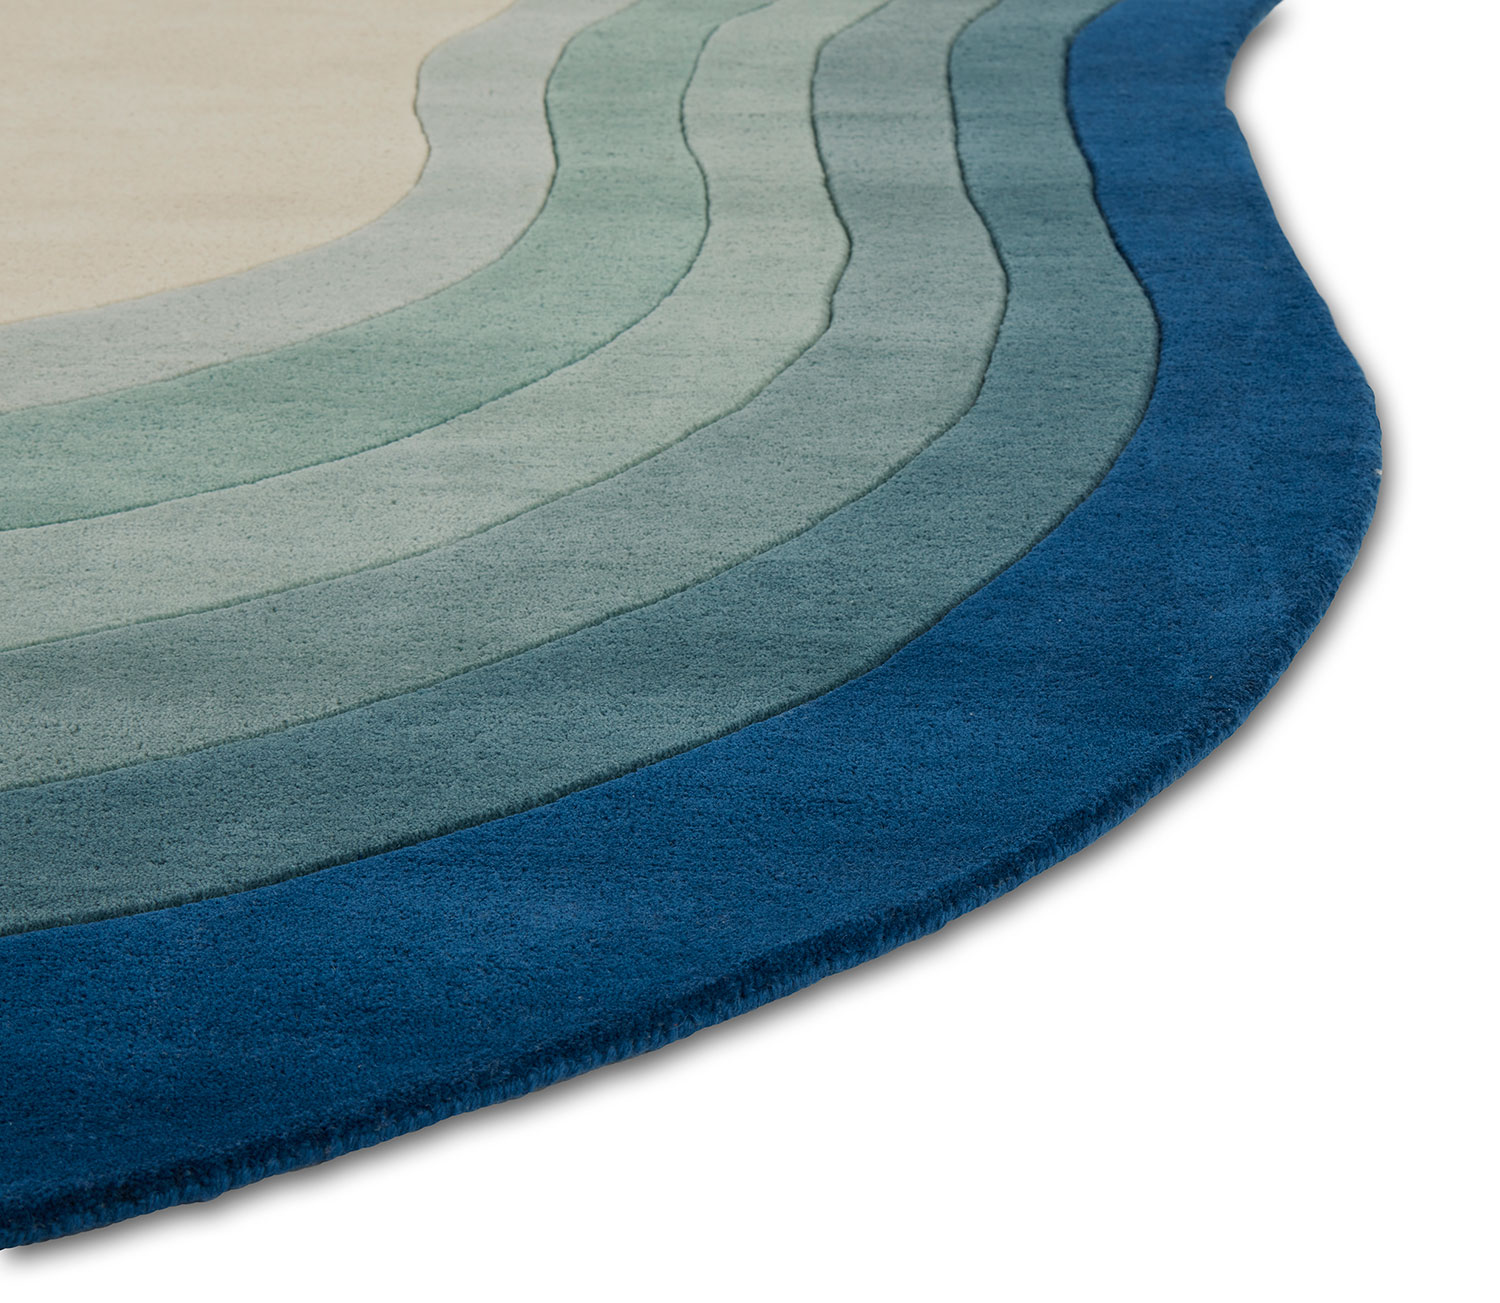 A corner of a blue gradient area rug called Pool Dream